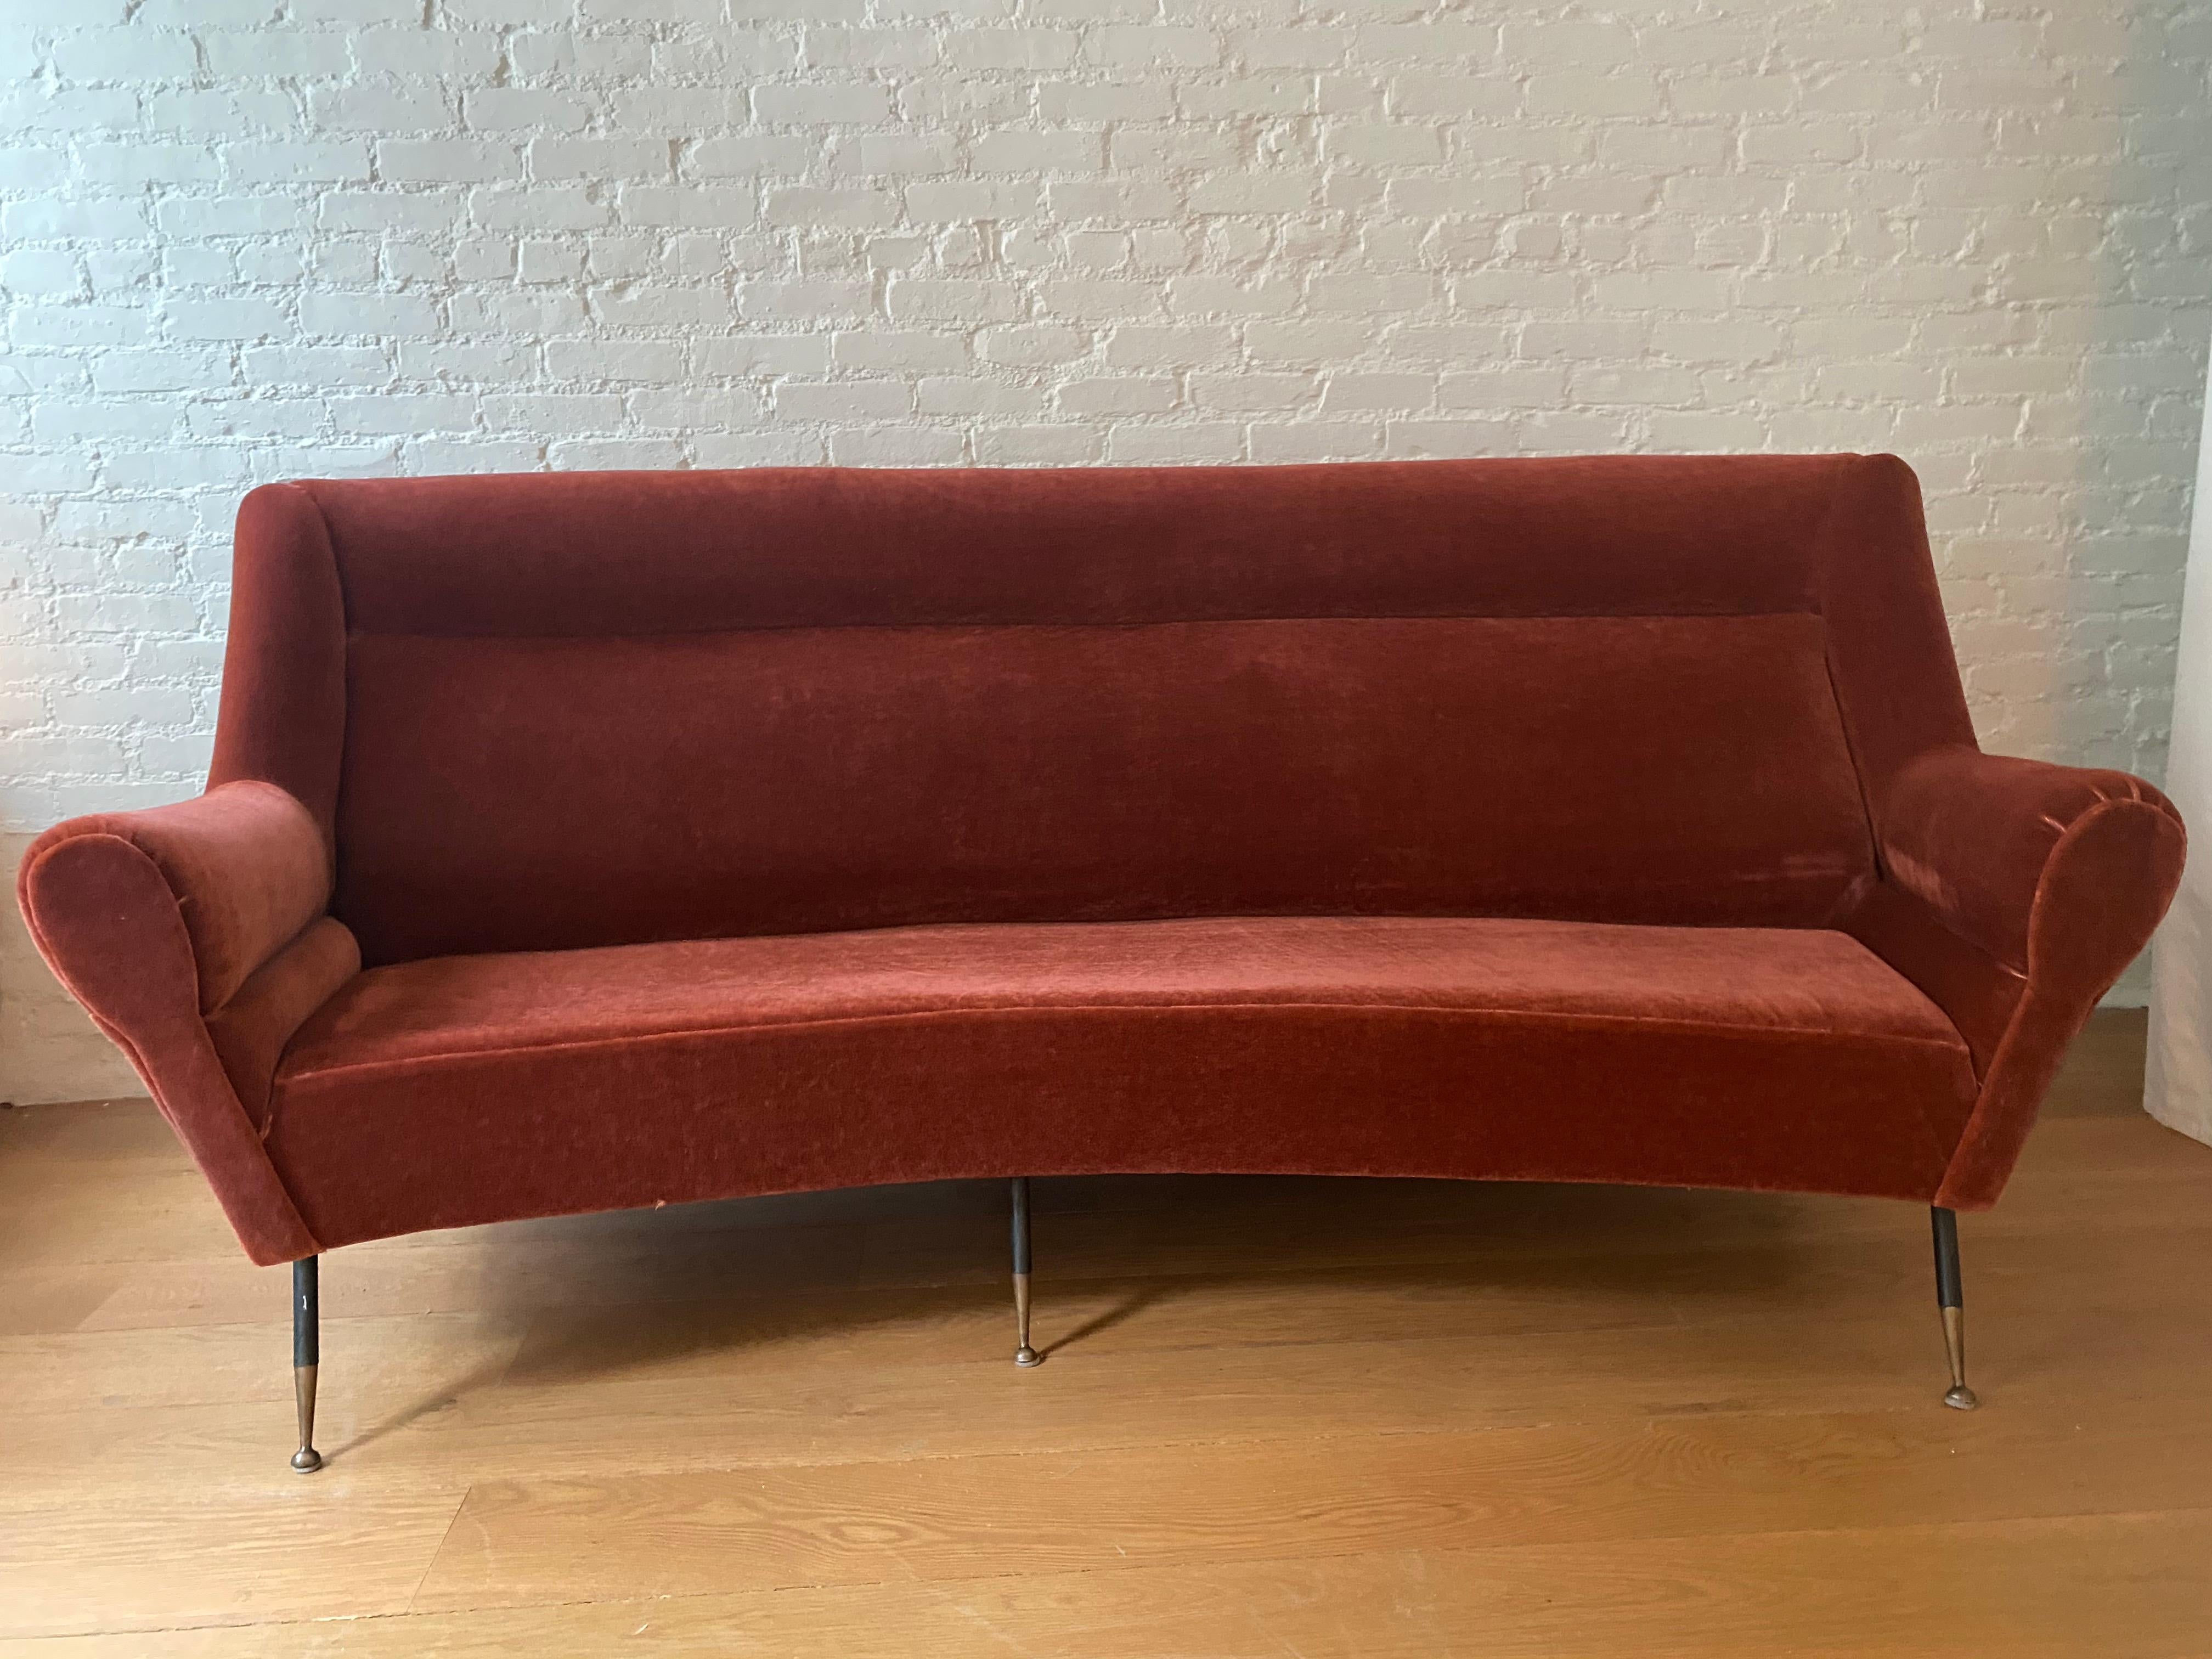 Gracious long curved 1950s Italian sofa by Gigi Radice. With curved shoulders and arms, the sofa body rests on tapered black metal legs with brass tipped feet. Legs attached to iron supports on sofa bottom. Luxurious mohair upholstery has some wear